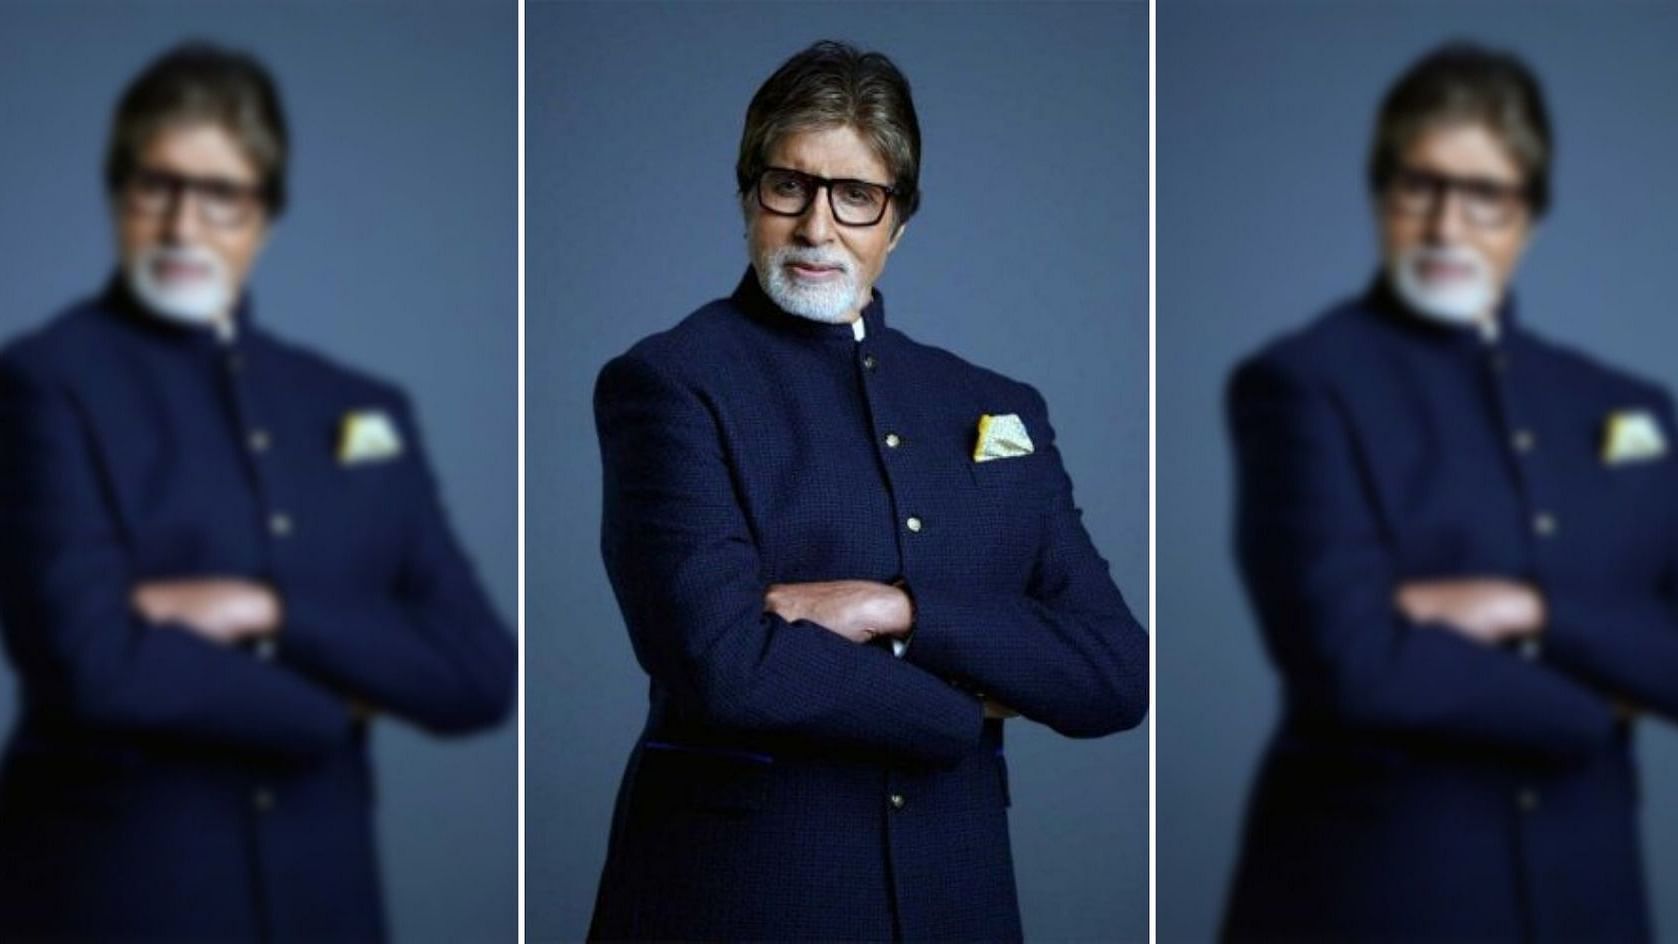 Amitabh Bachchan asked everyone to stay safe.&nbsp;